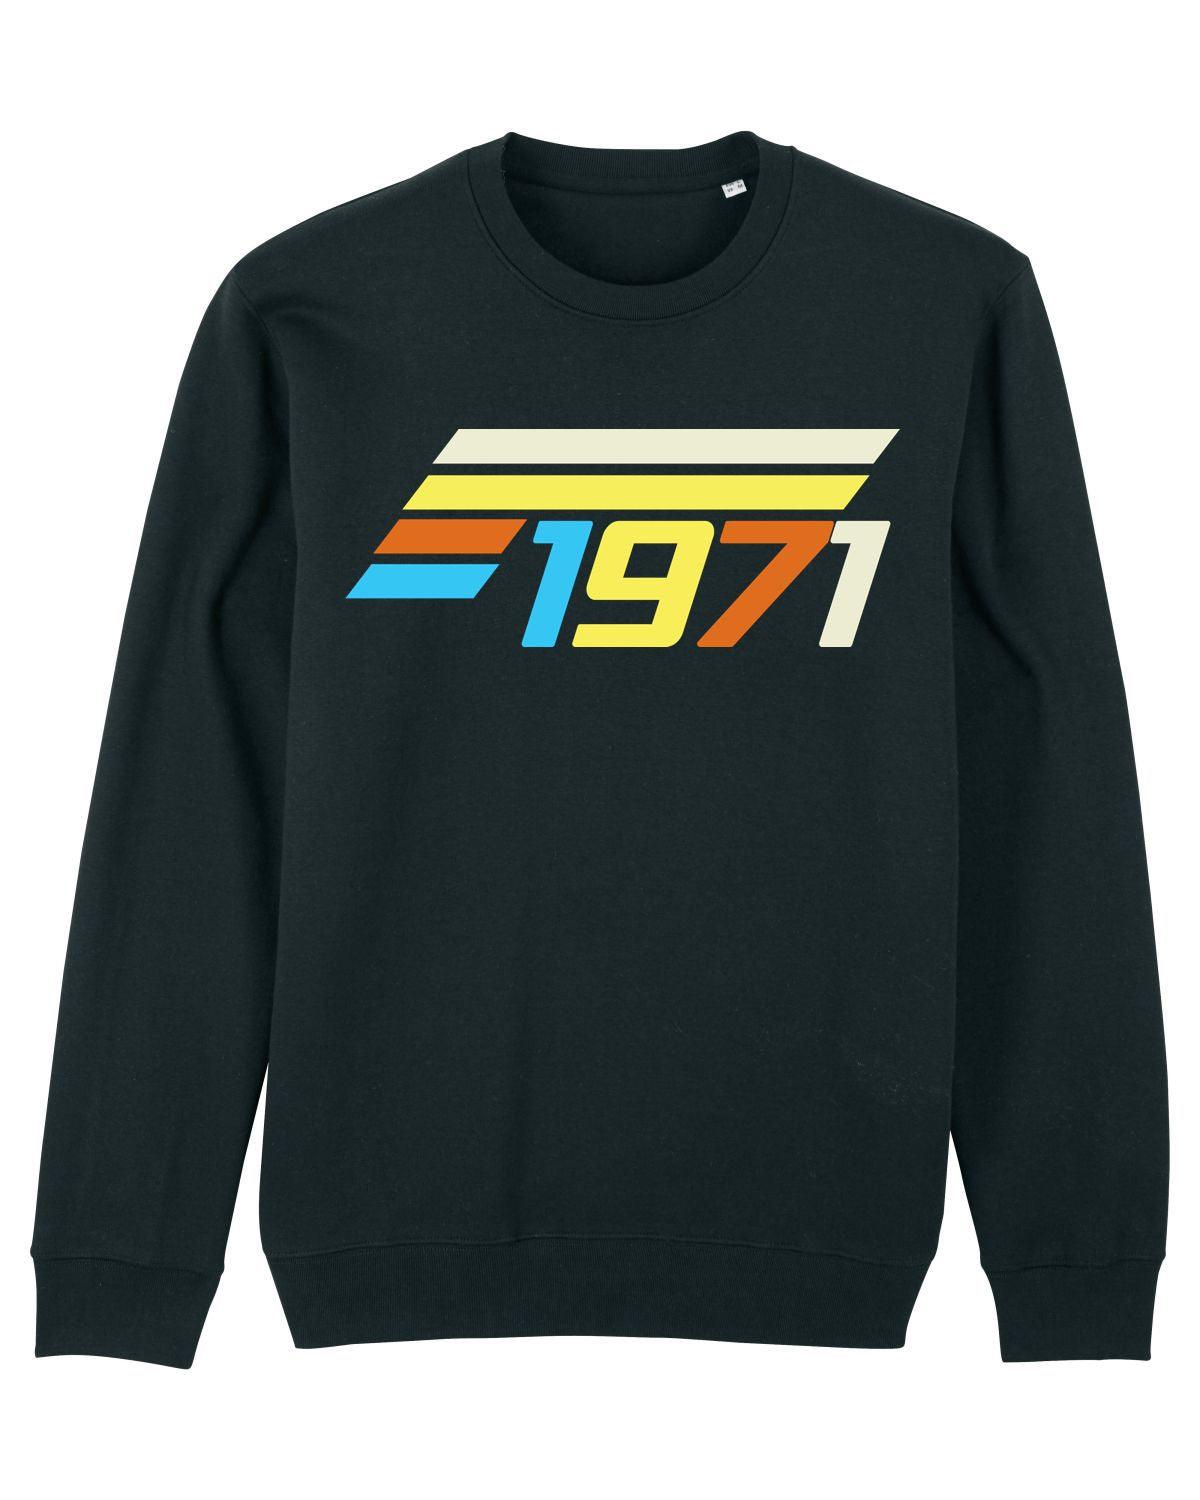 THIS IS MY NUMBER: Sweatshirt: Bespoke With Your Own Numbers (2 Colour Options) - SOUND IS COLOUR